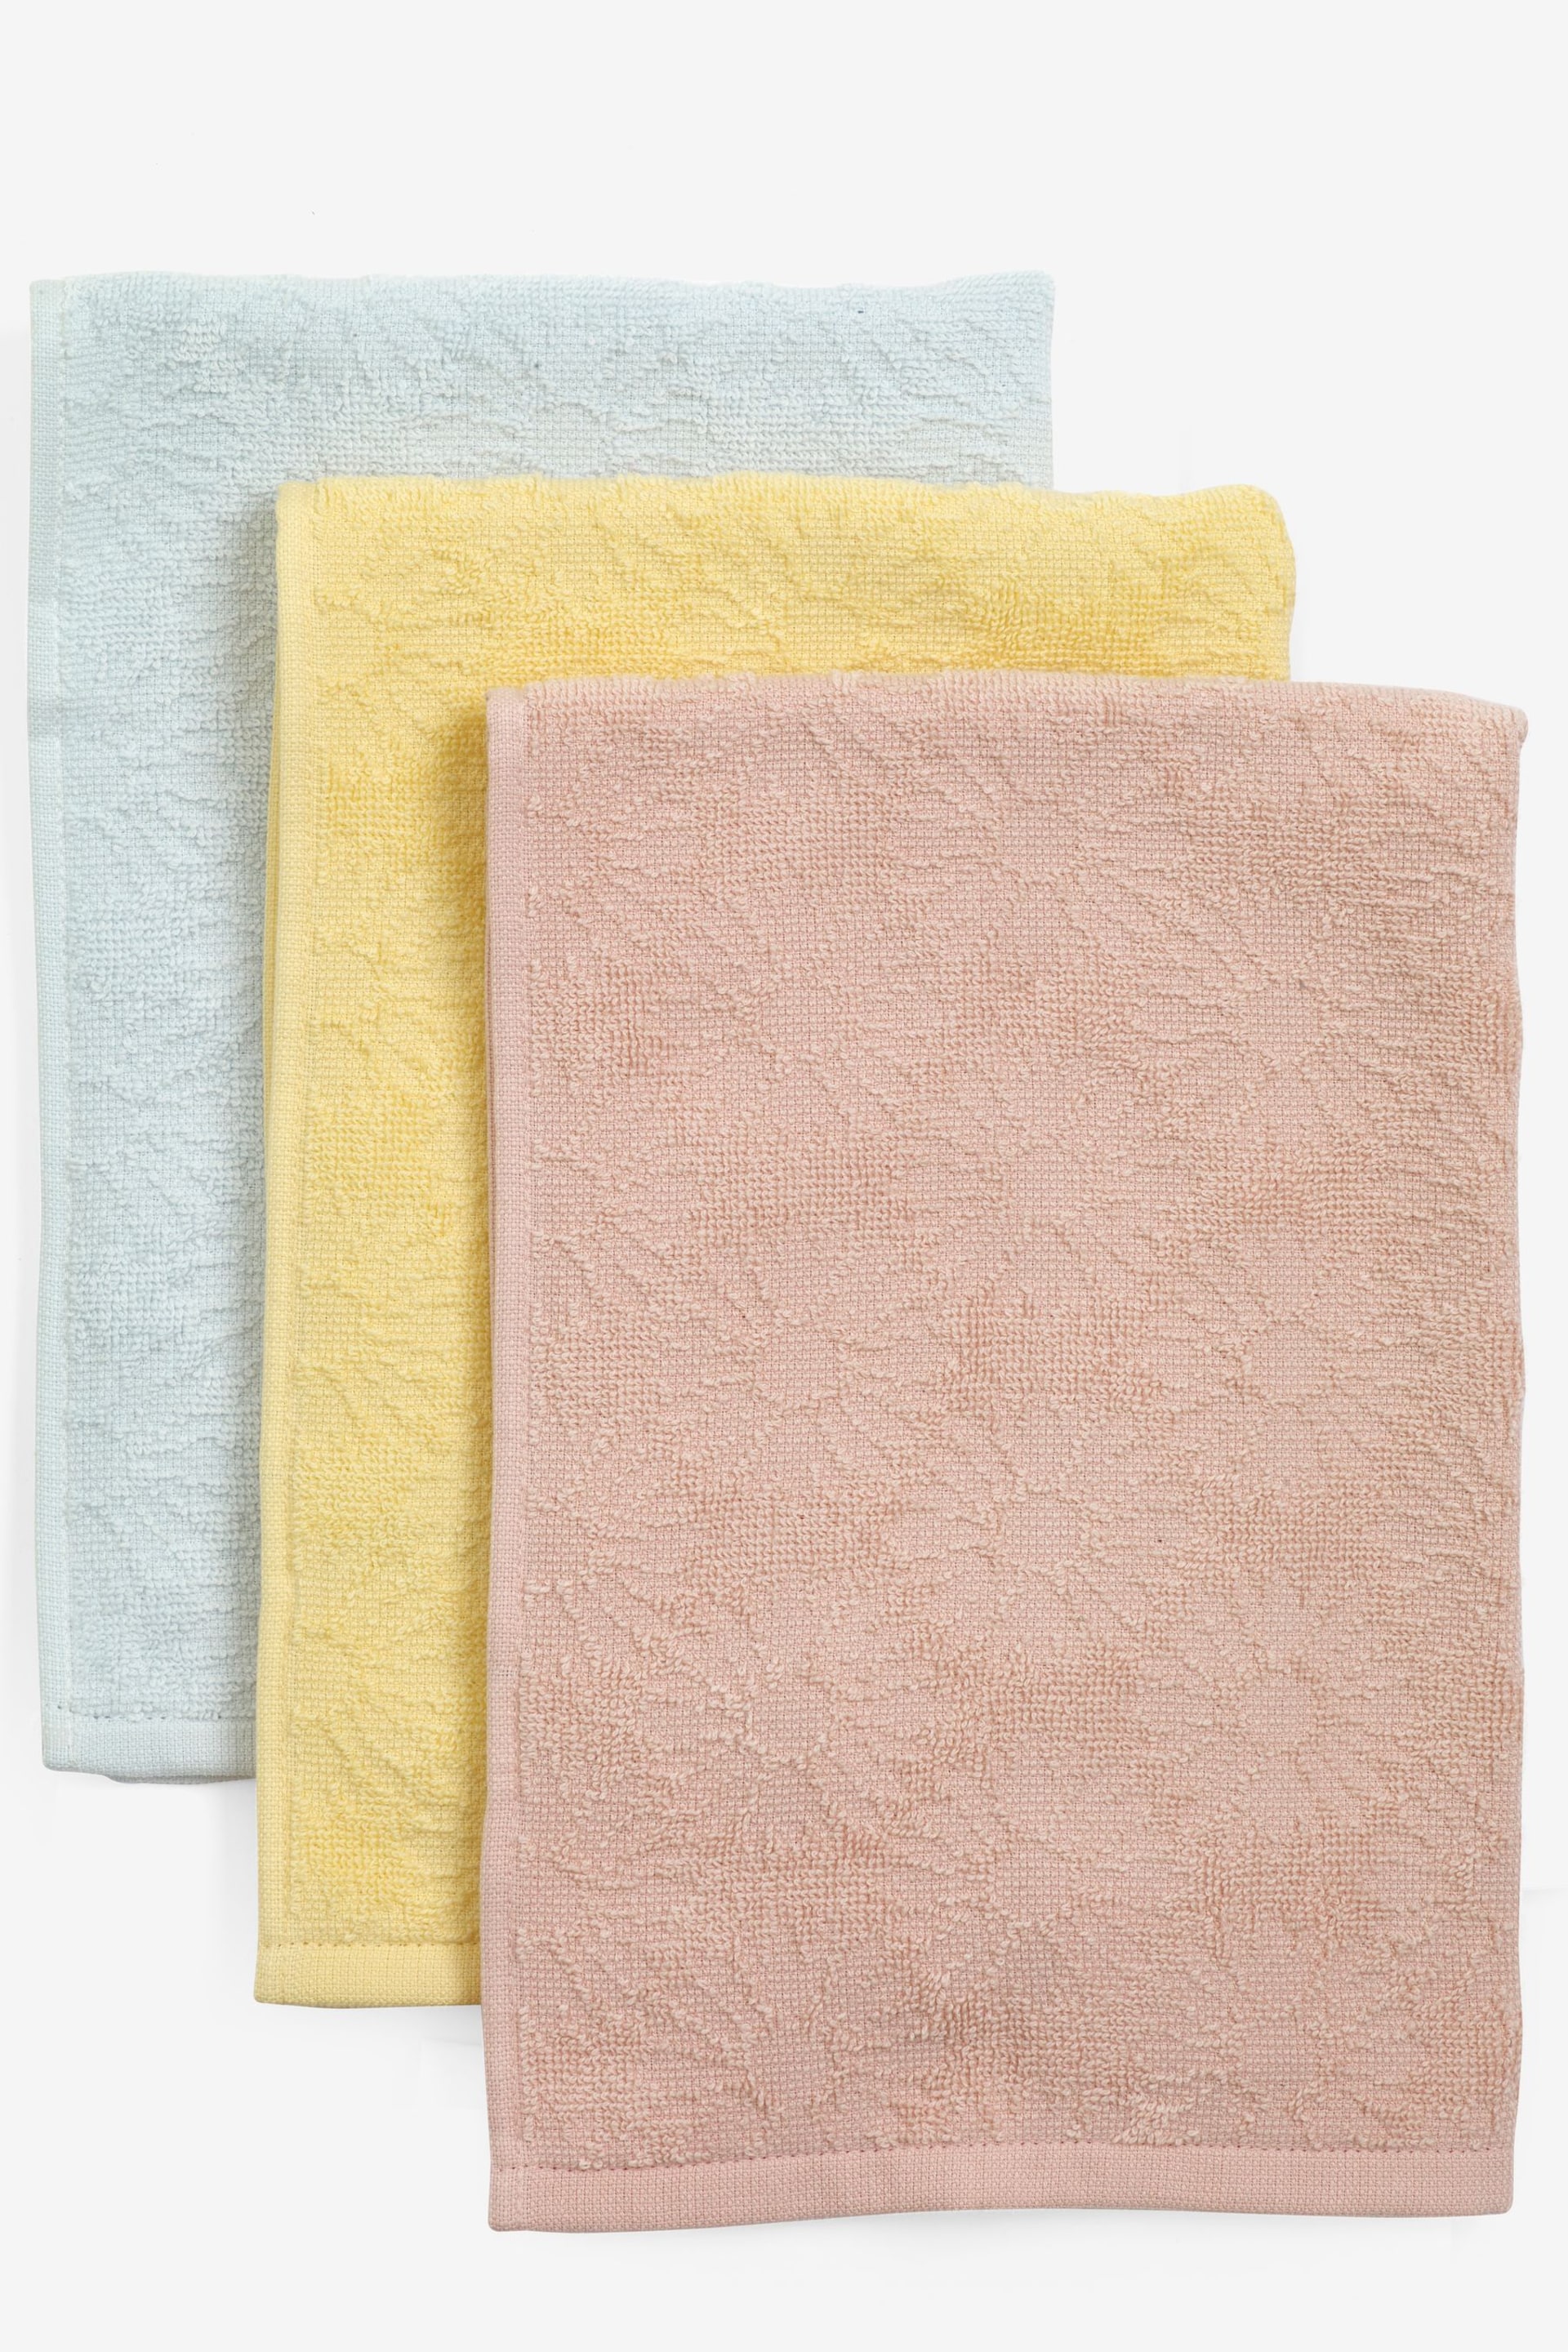 Set of 3 Pastel Daisy Terry Tea Towels - Image 4 of 4